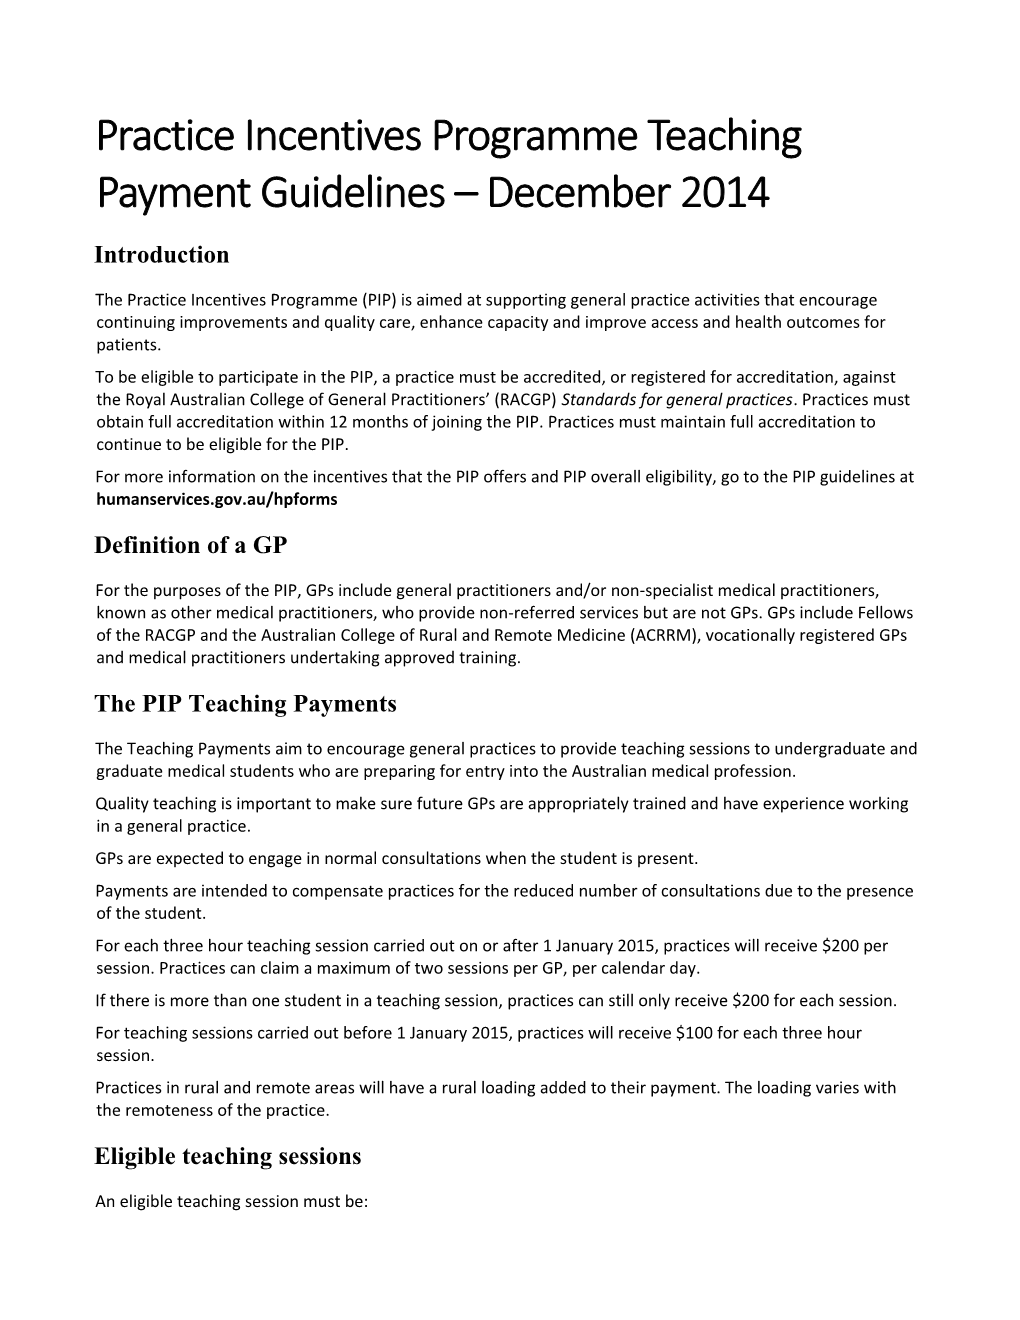 Practice Incentives Programeteaching Payments Guidelines May 2014